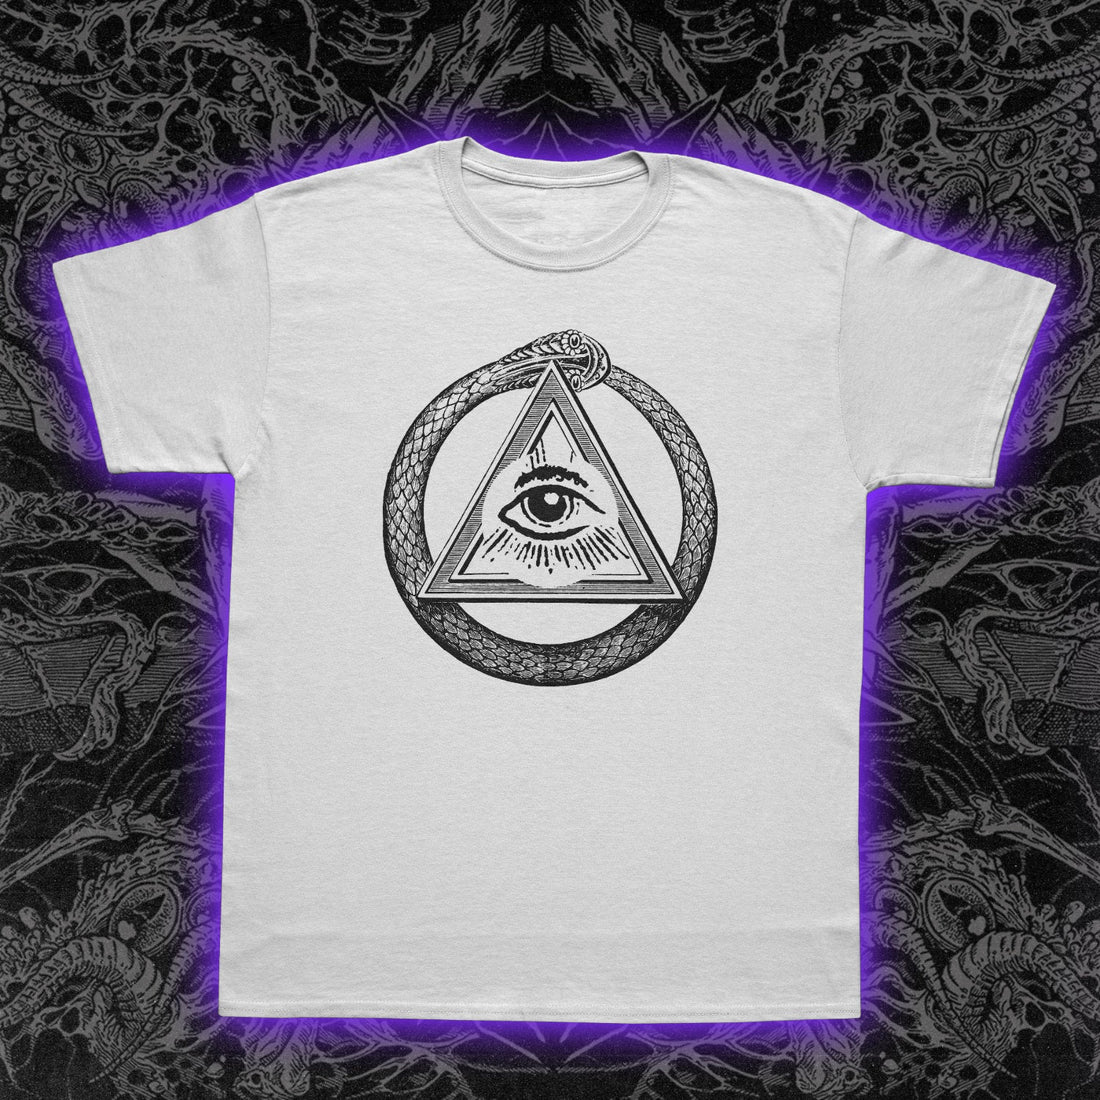 Occult Clothing | Occult Shirt | Creepy Shirt - Night Channels